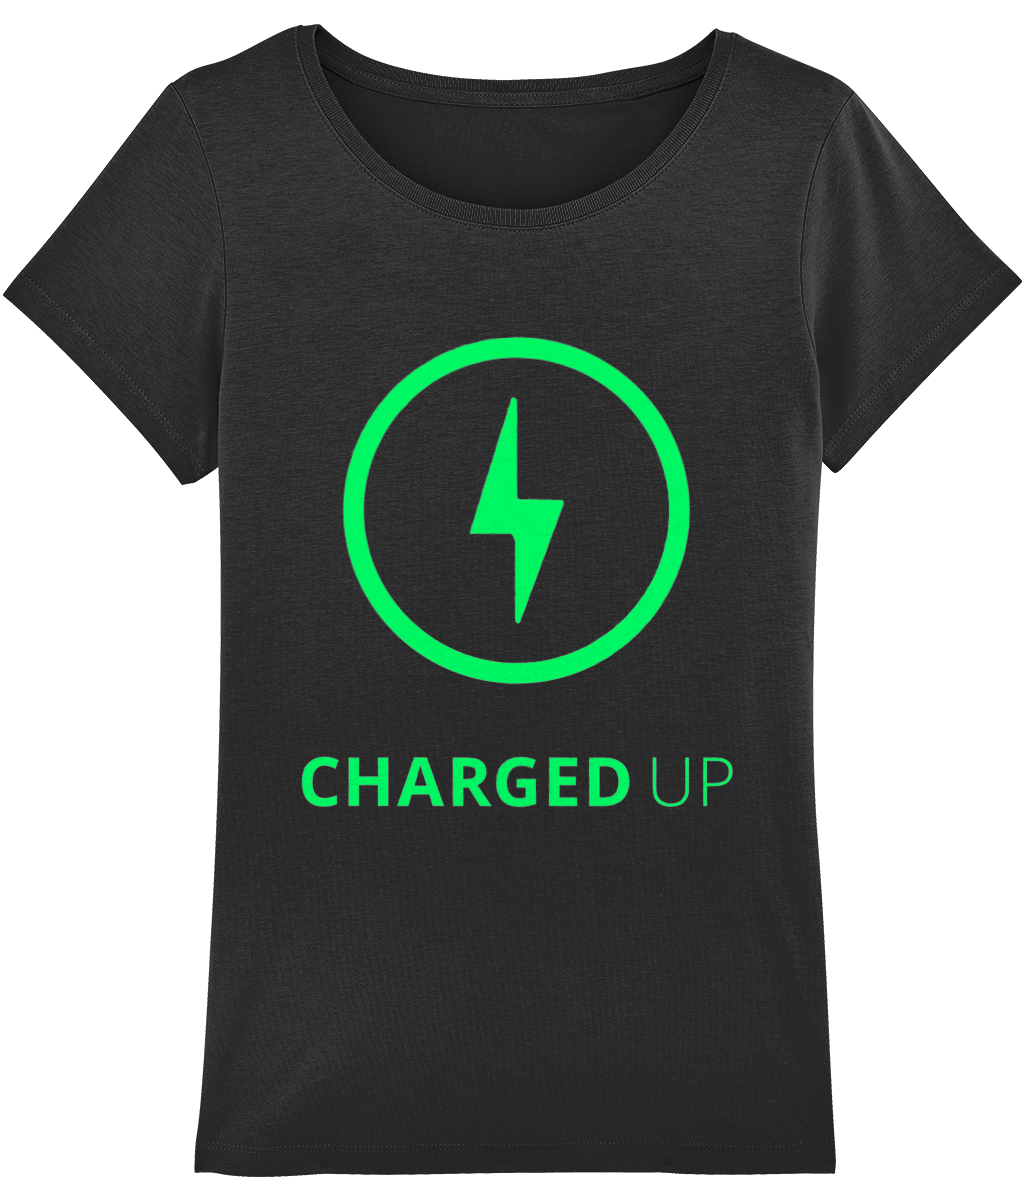 CHARGED UP WOMEN'S T-SHIRT